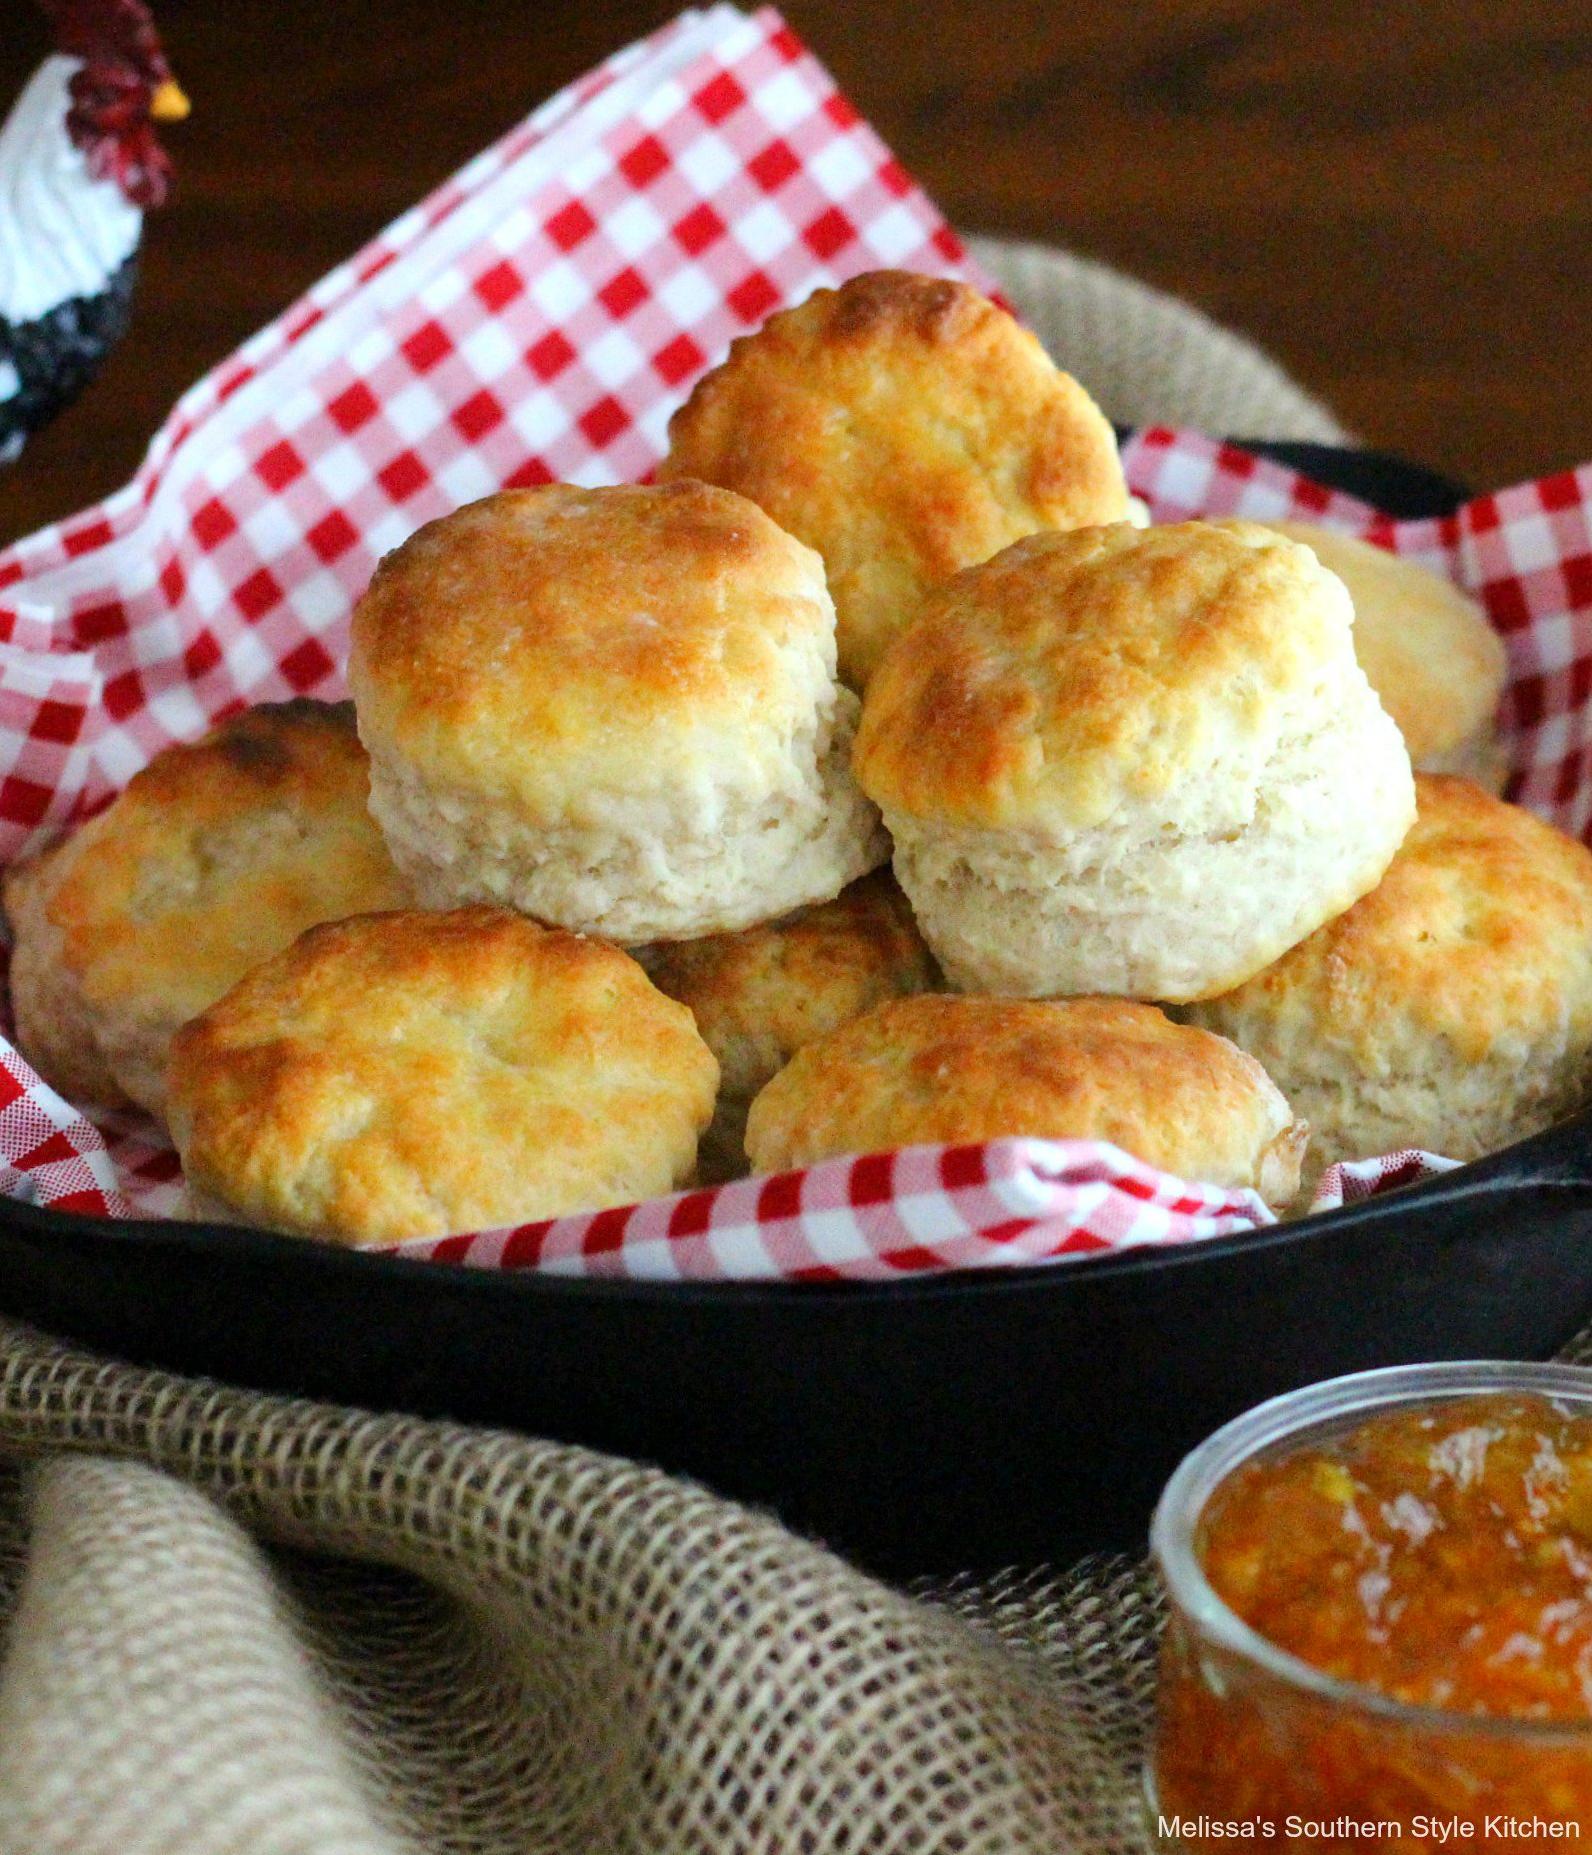  Close-up of fresh, oven-baked Southern biscuits straight out of the oven